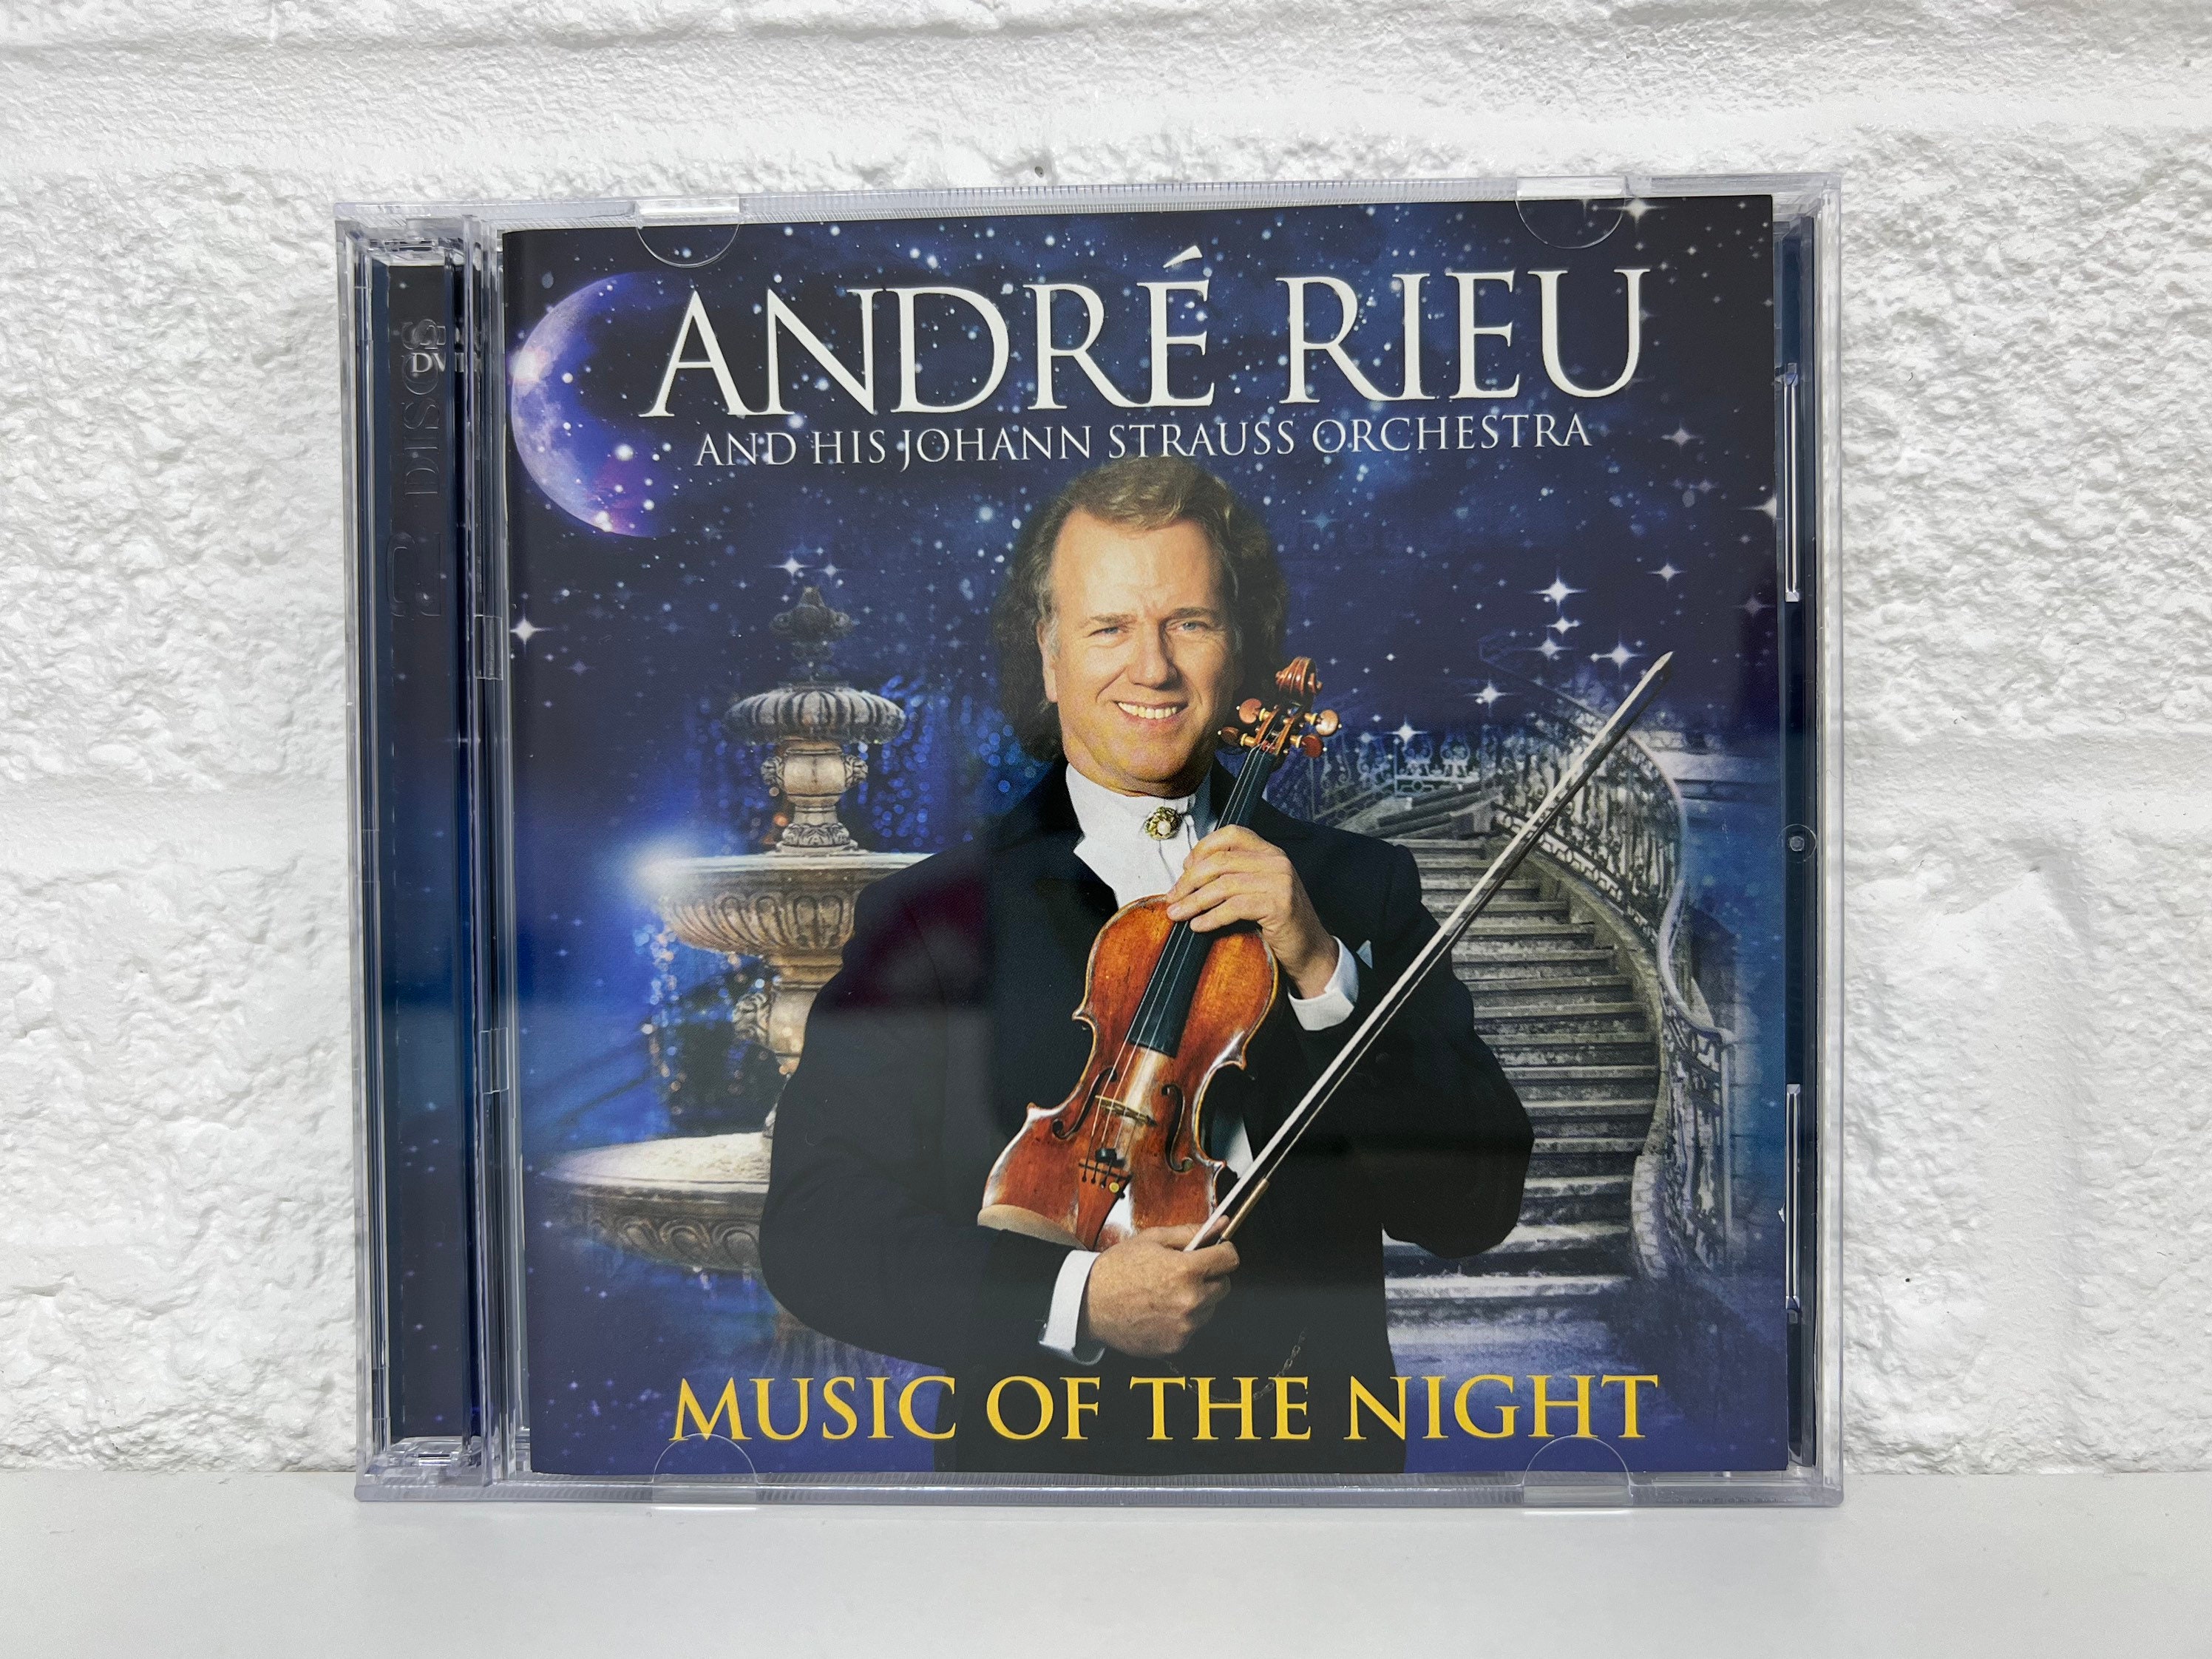 Andre Rieu CD Collection Album Music of the Night Genre Etsy